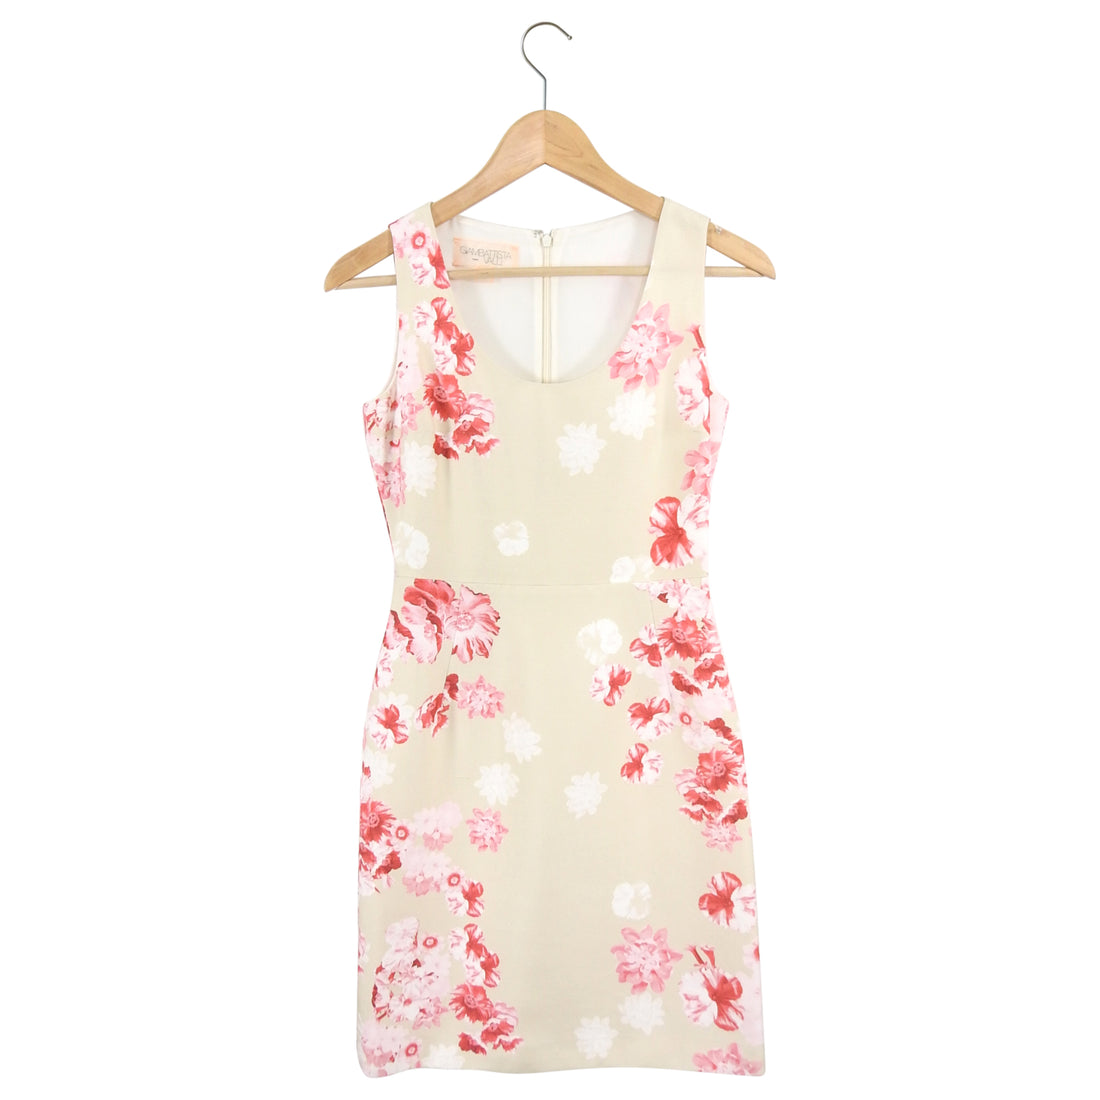 White and Pink Floral Dress